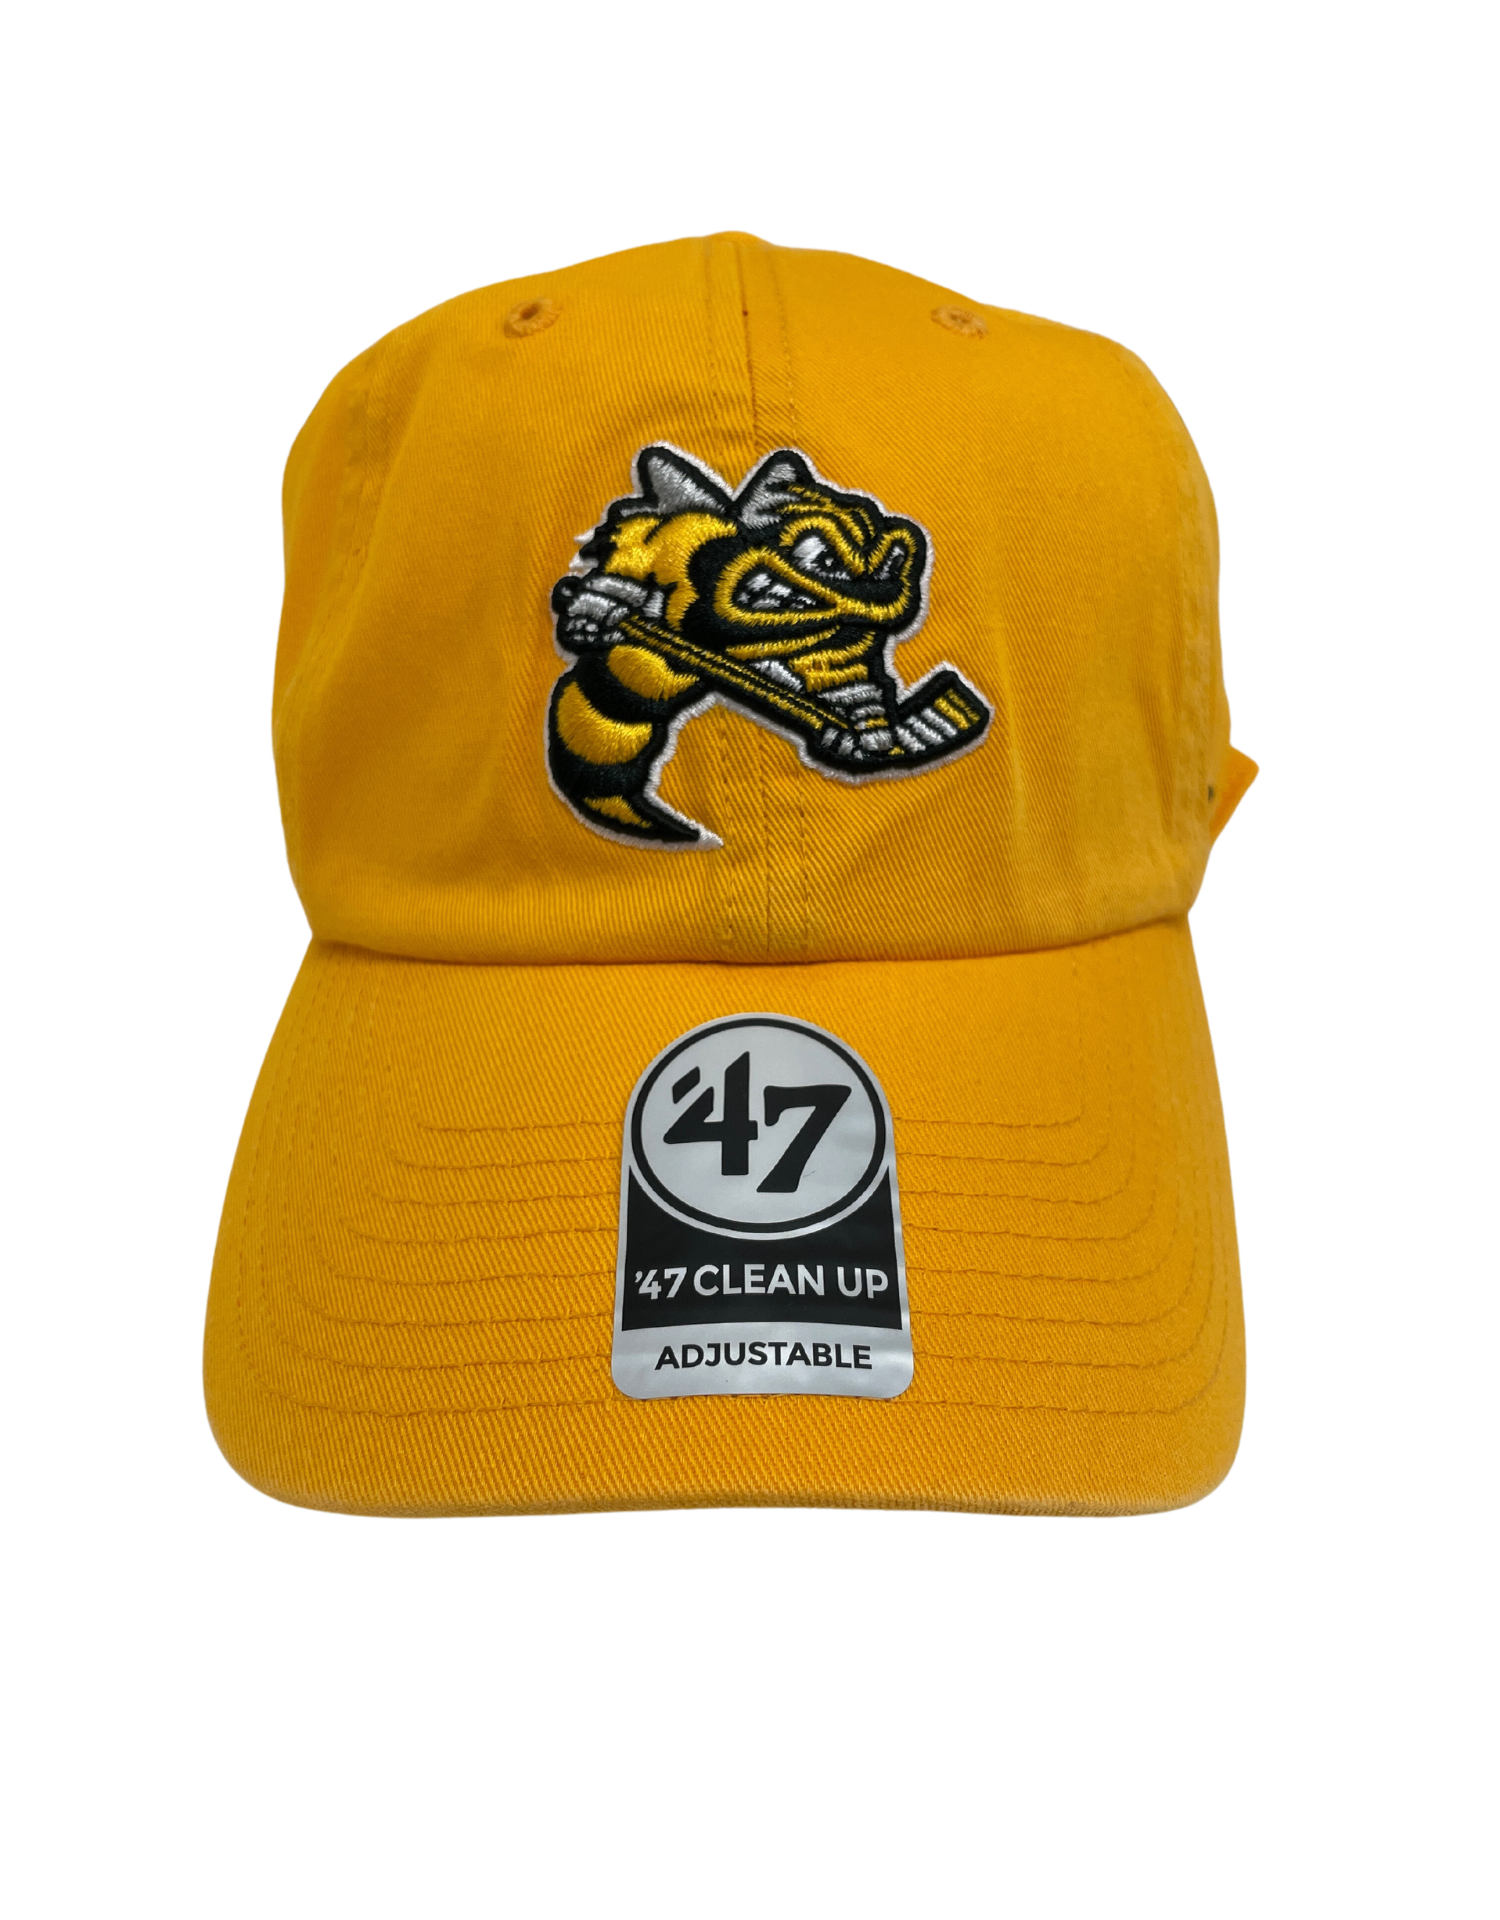 '47 Yellow Clean Up Hat